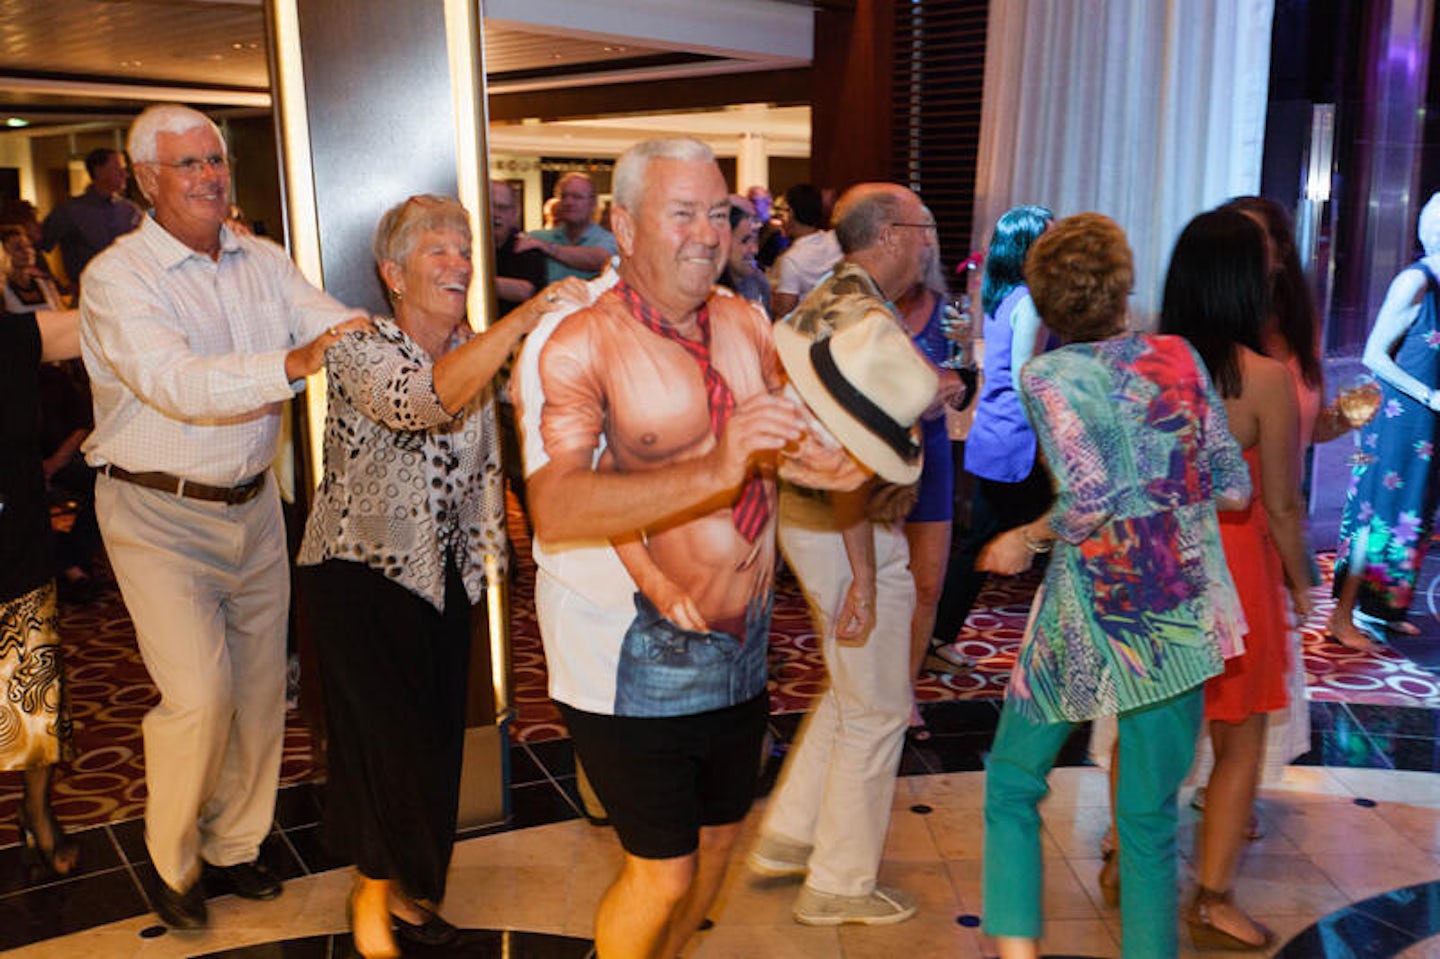 70s Party on Celebrity Silhouette